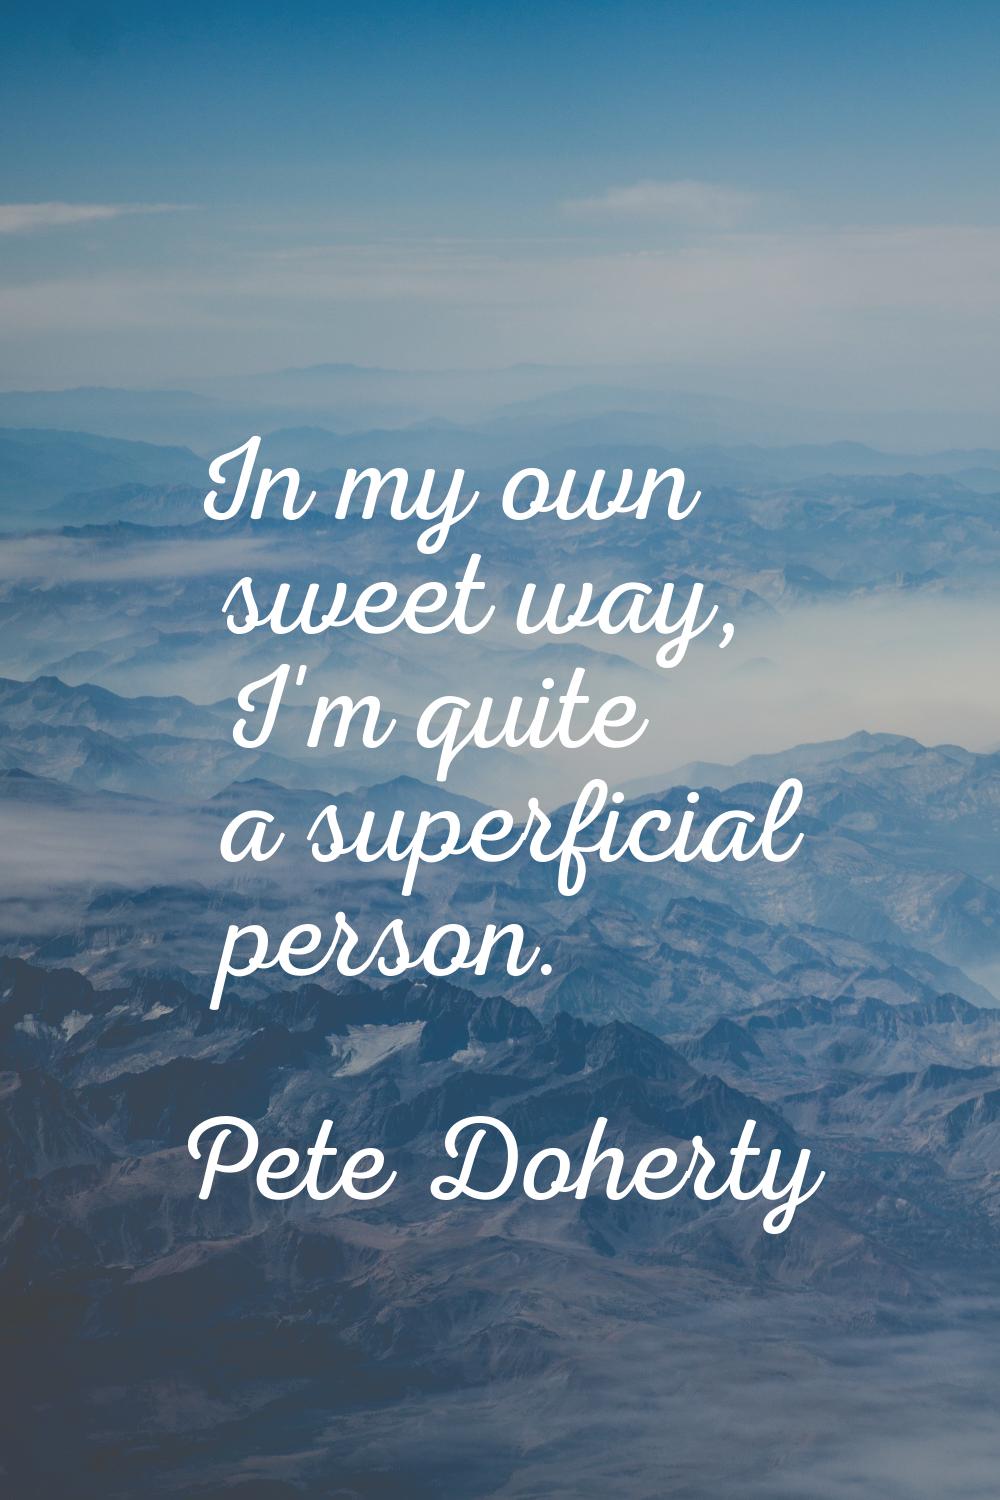 In my own sweet way, I'm quite a superficial person.